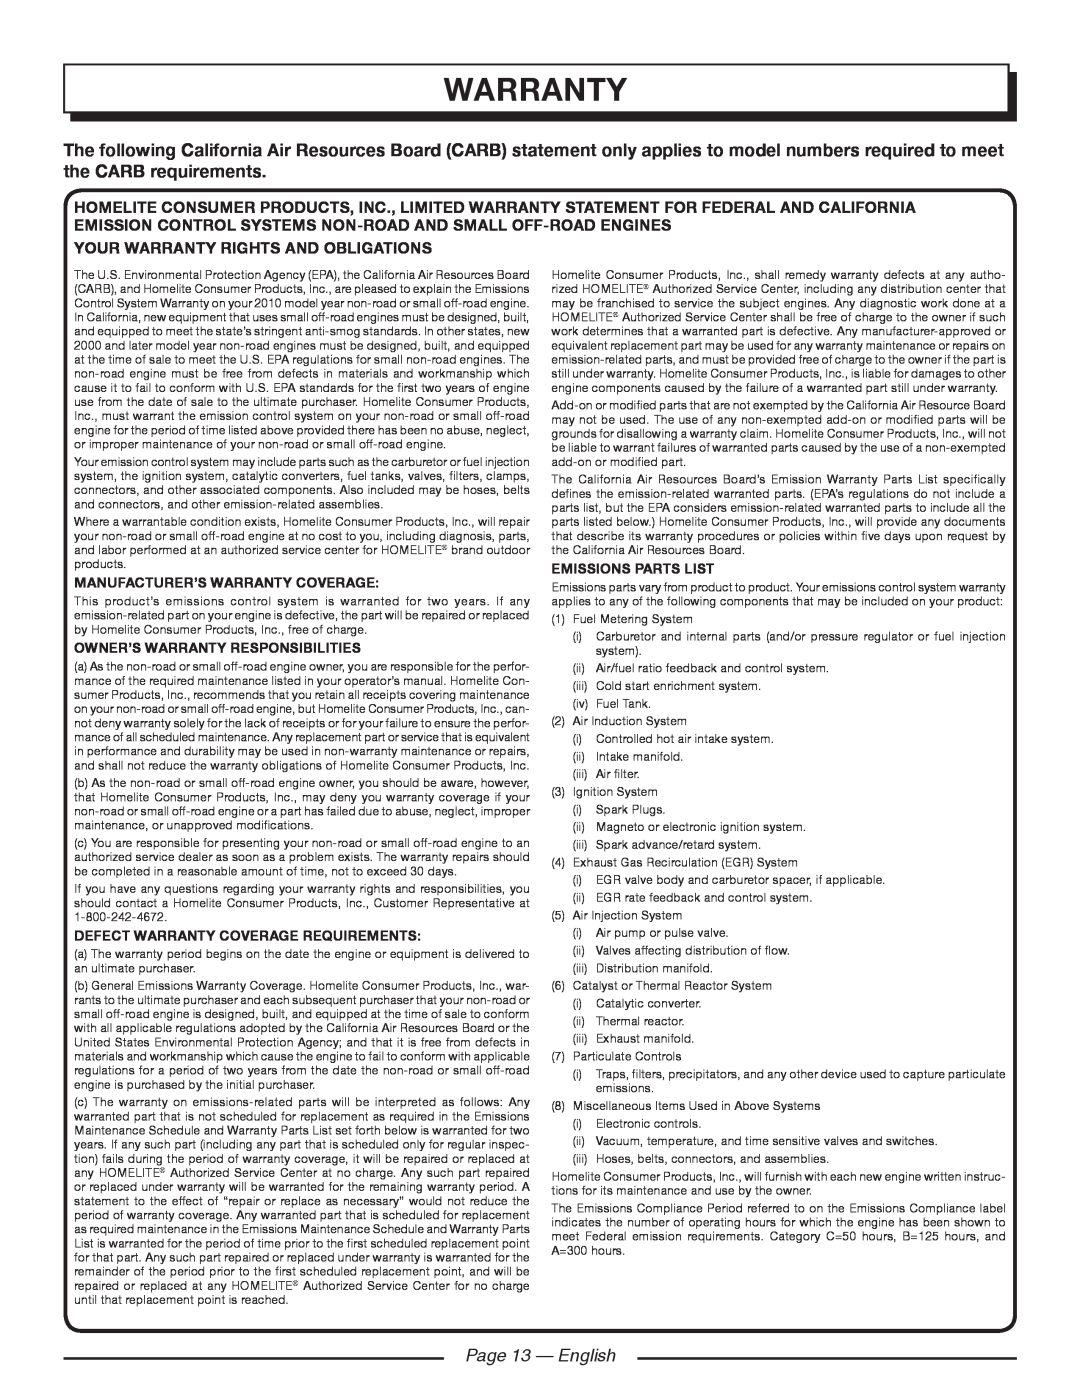 Homelite UT09520 Page 13 - English, Manufacturer’S Warranty Coverage, Owner’S Warranty Responsibilities 